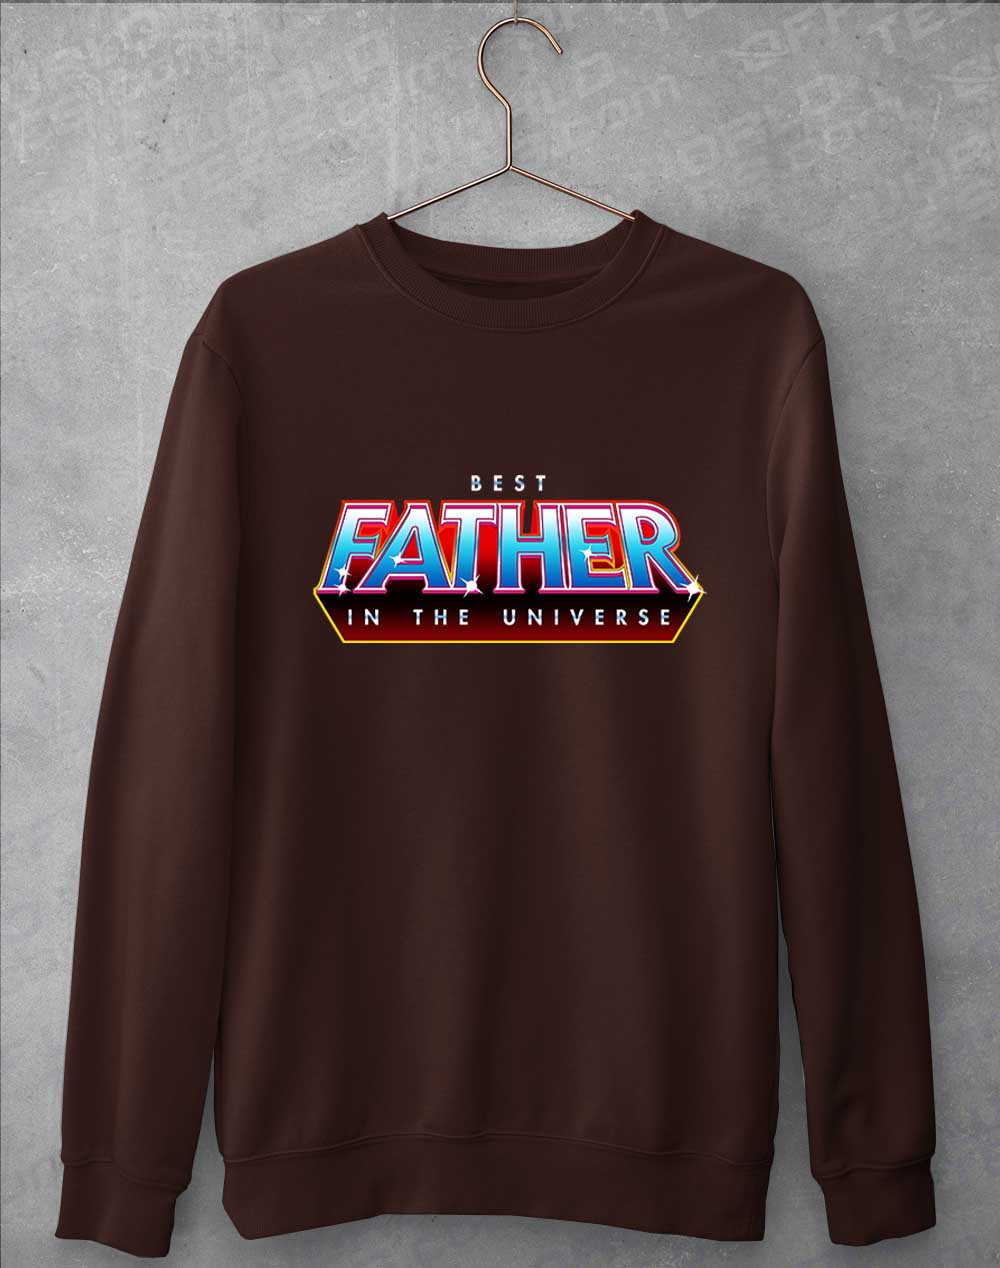 Hot Chocolate - Best Father in the Universe Sweatshirt